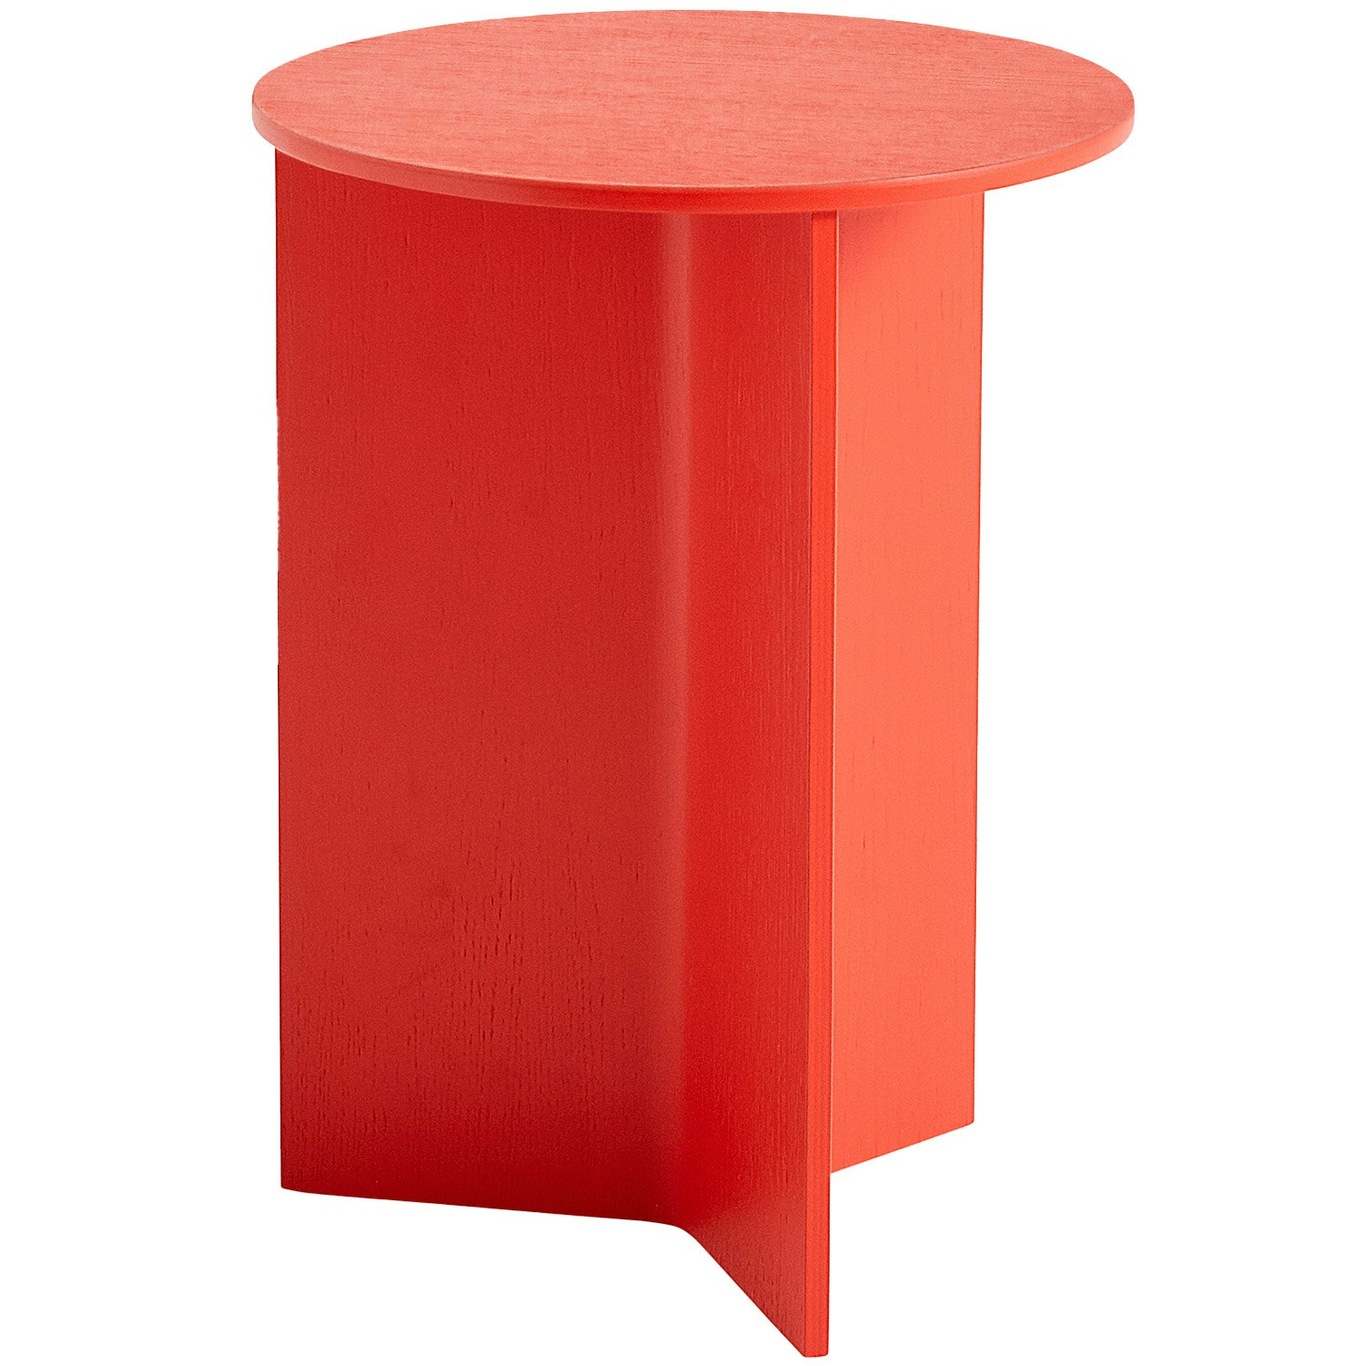 Slit Table Ø35 cm, Candy Red